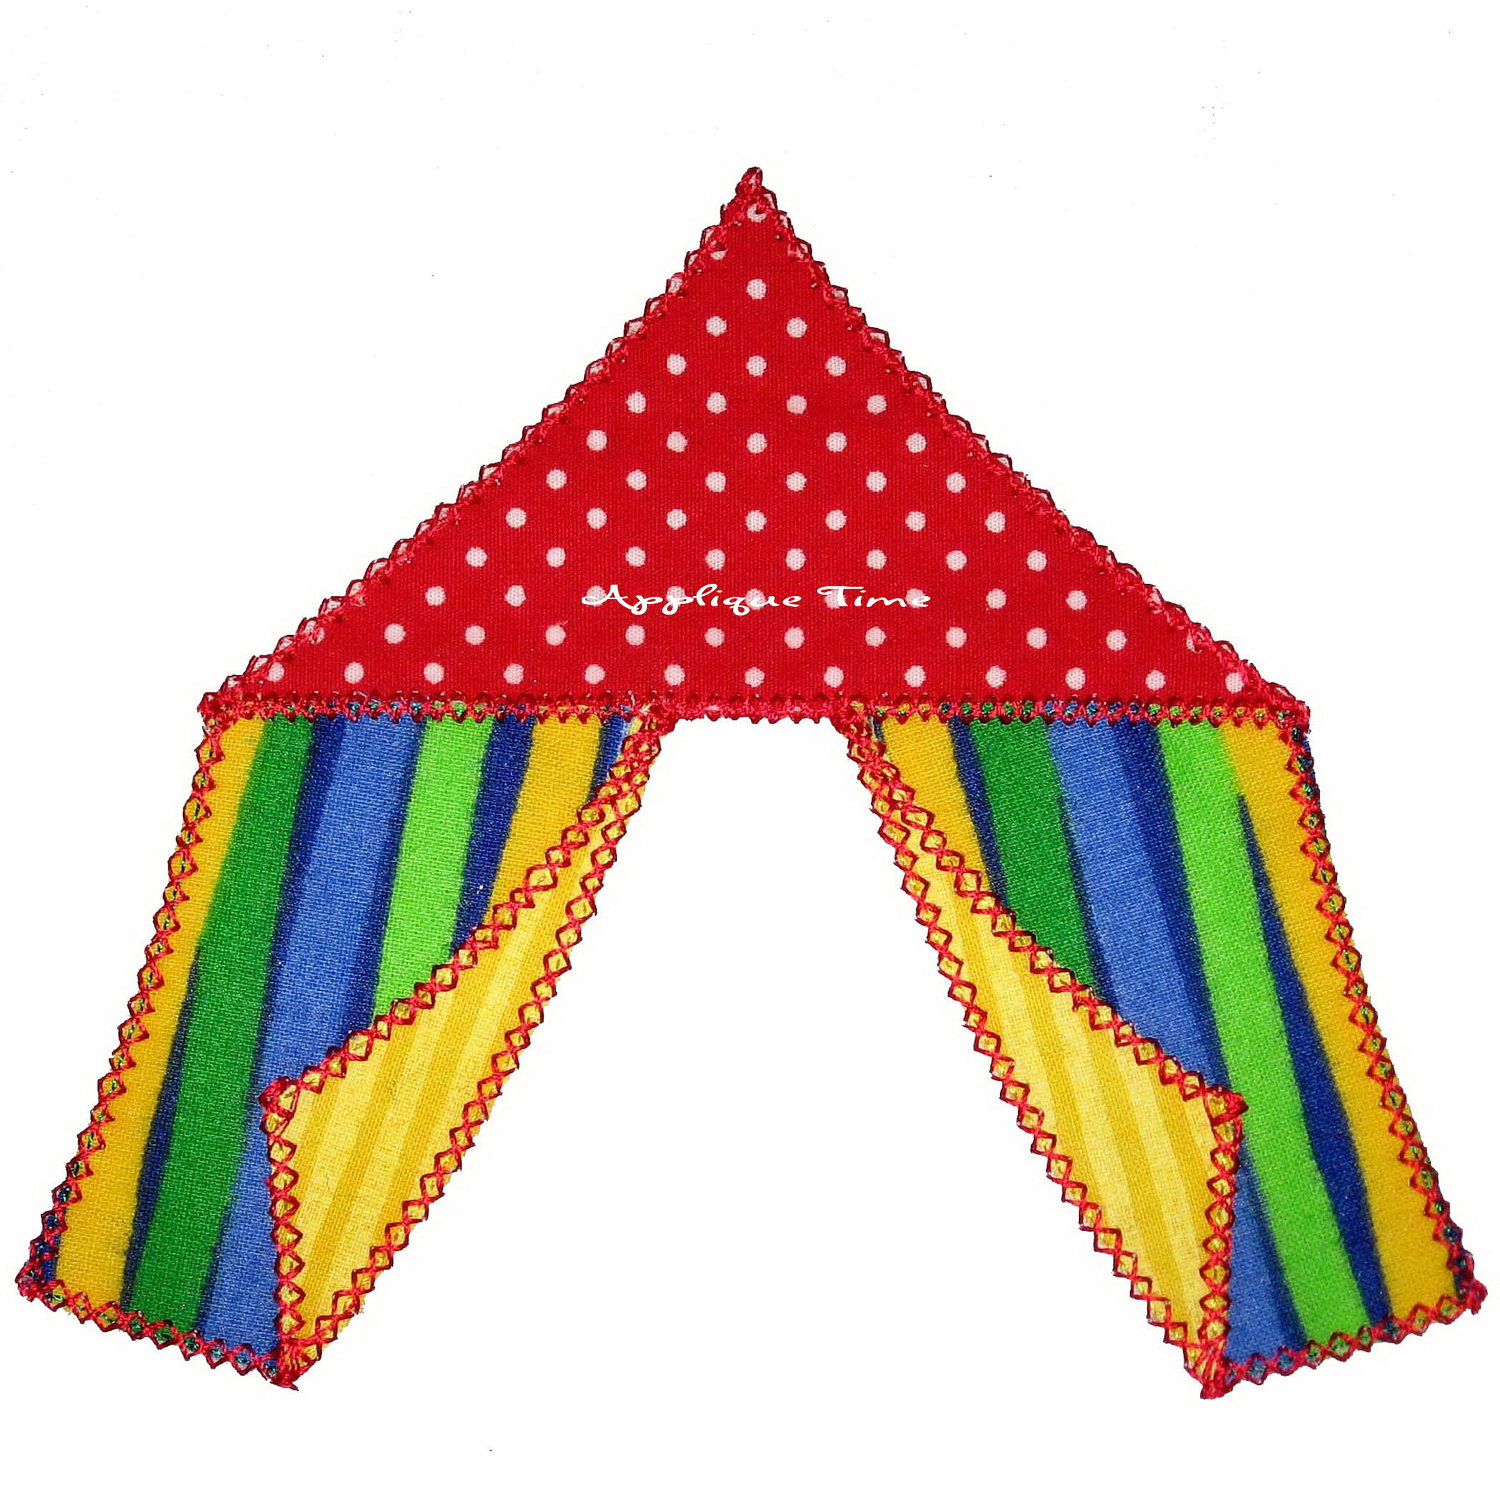 Popular items for big top circus on Etsy